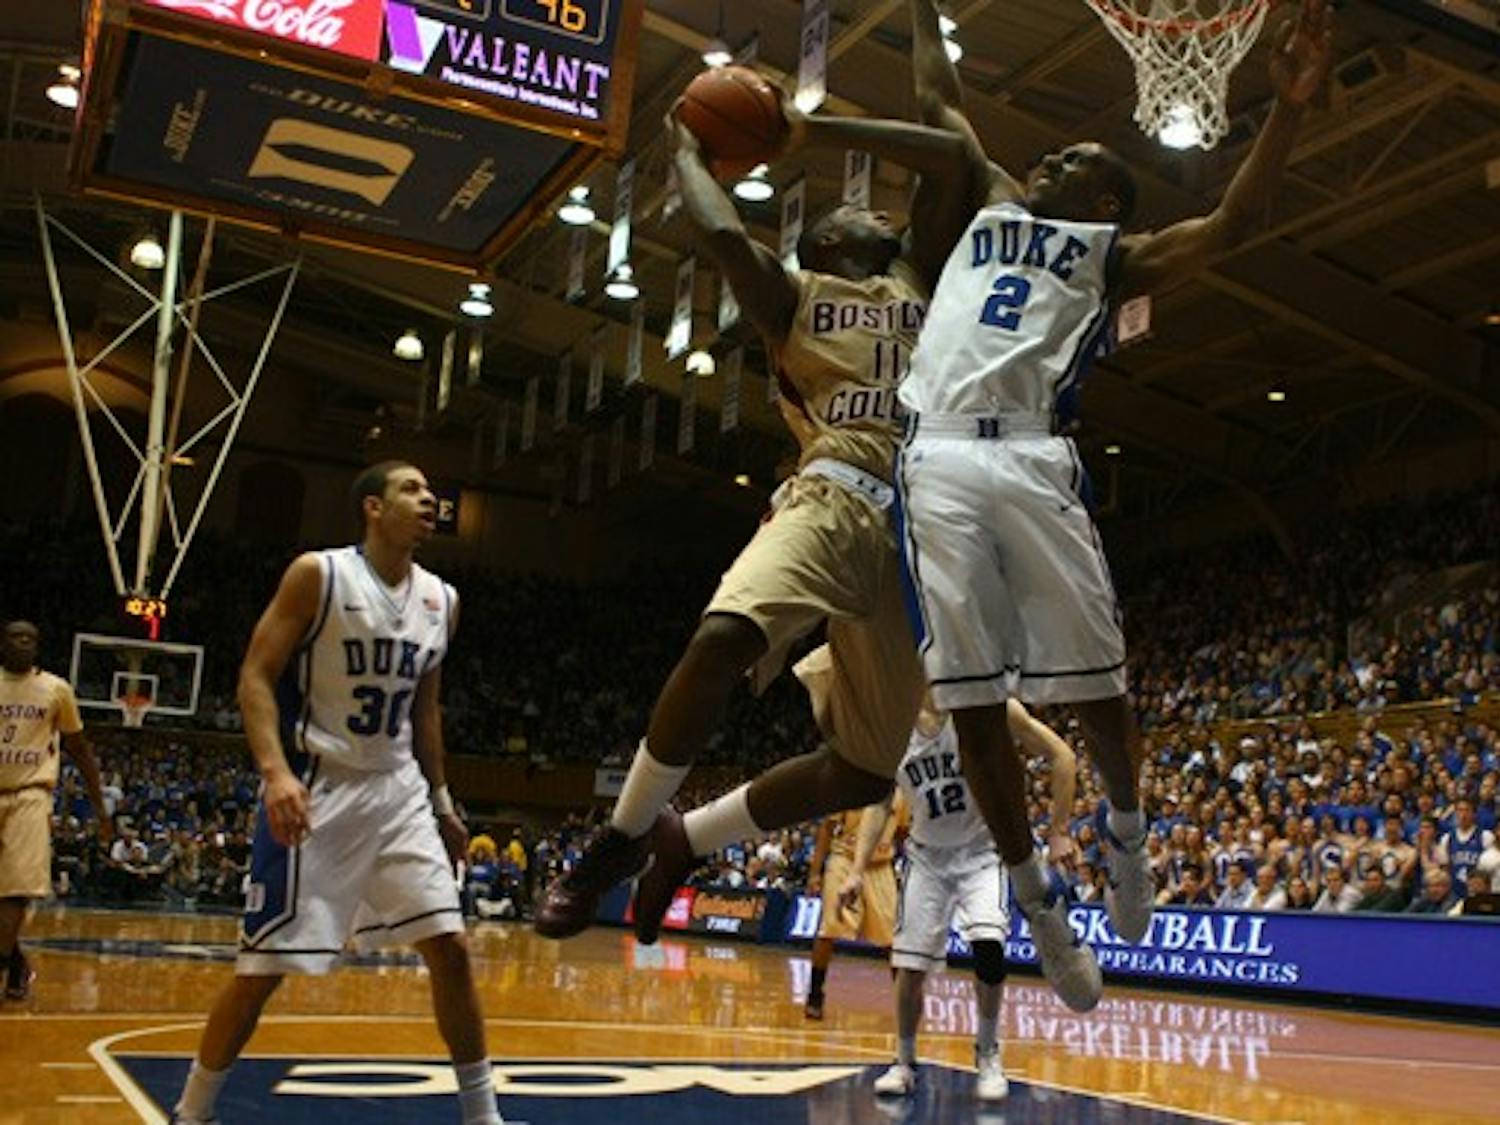 Senior Nolan Smith scored a game-high 28 points on 10-for-20 shooting from the field against Boston College. The Blue Devils defeated the Eagles 84-68 Thursday night in Cameron Indoor Stadium.